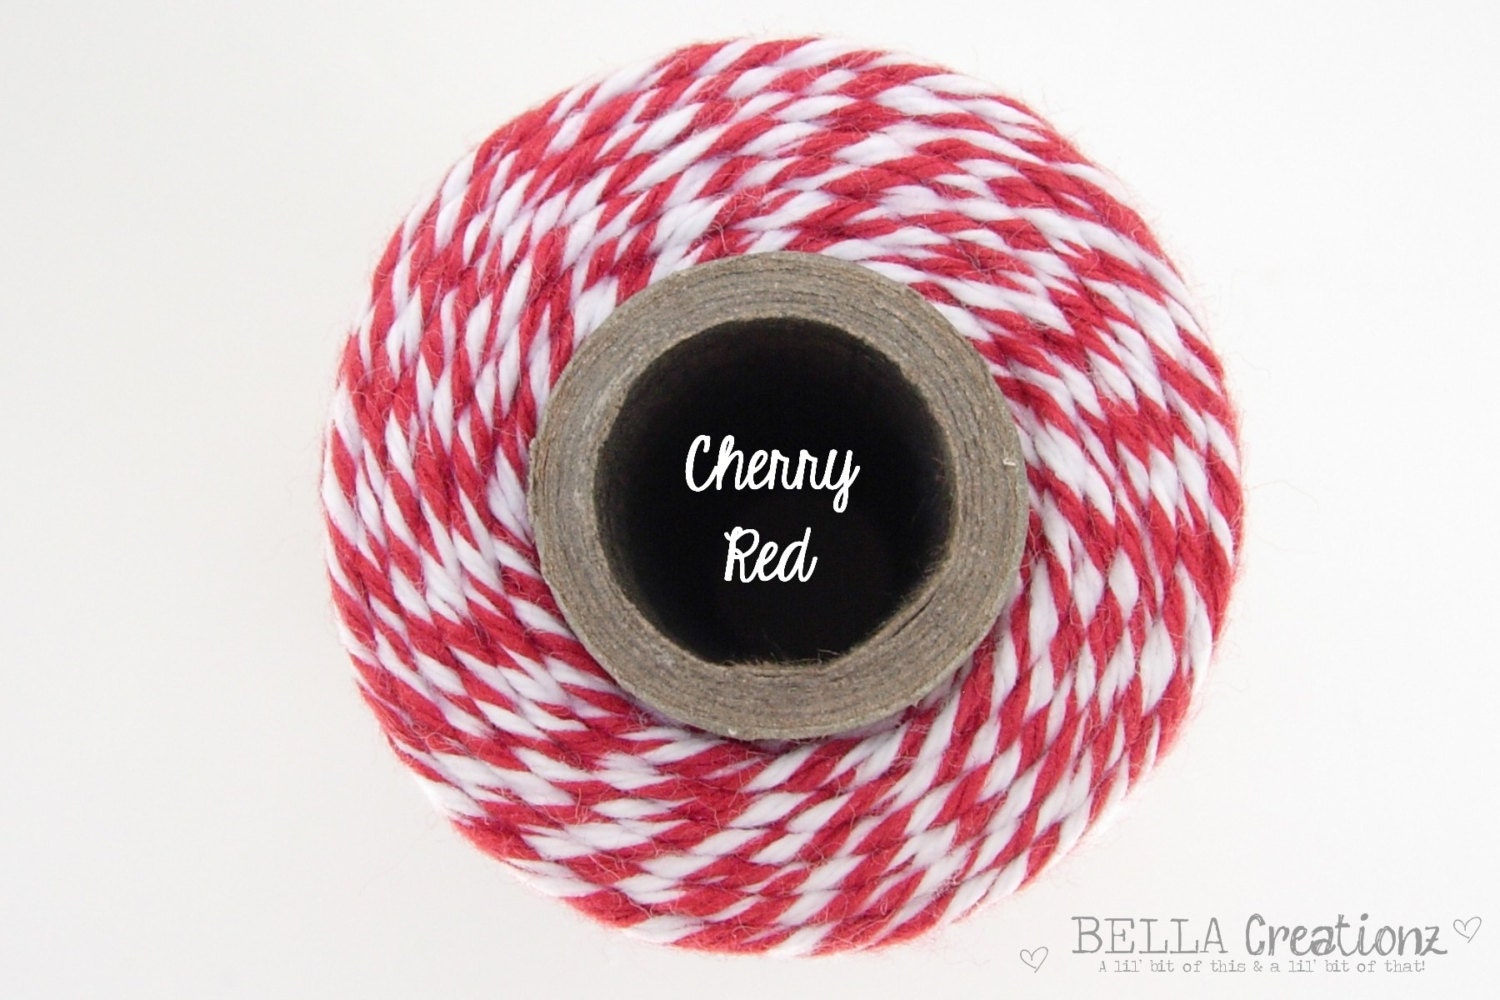 SALE - Cherry Red Bakers Twine by Timeless Twine - 1 Spool (160 Yards)